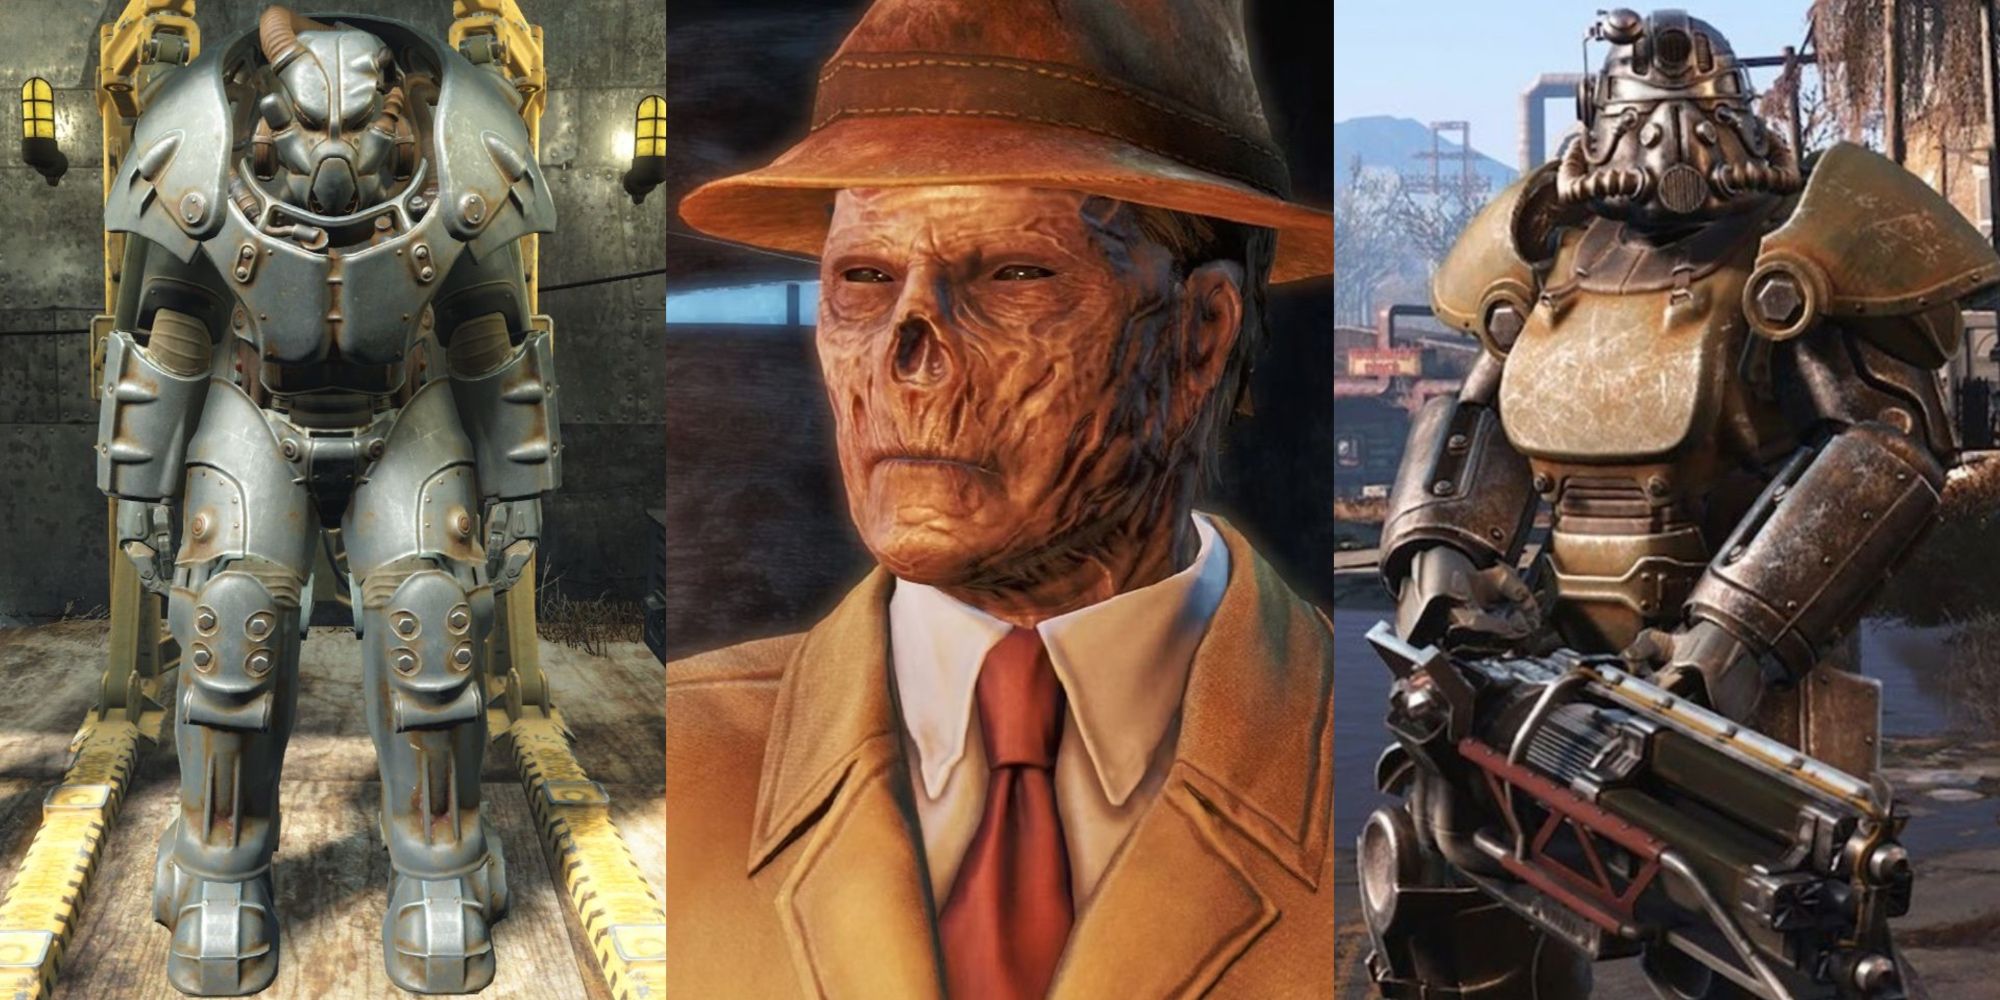 Fallout 4 completely revamps the way perks work